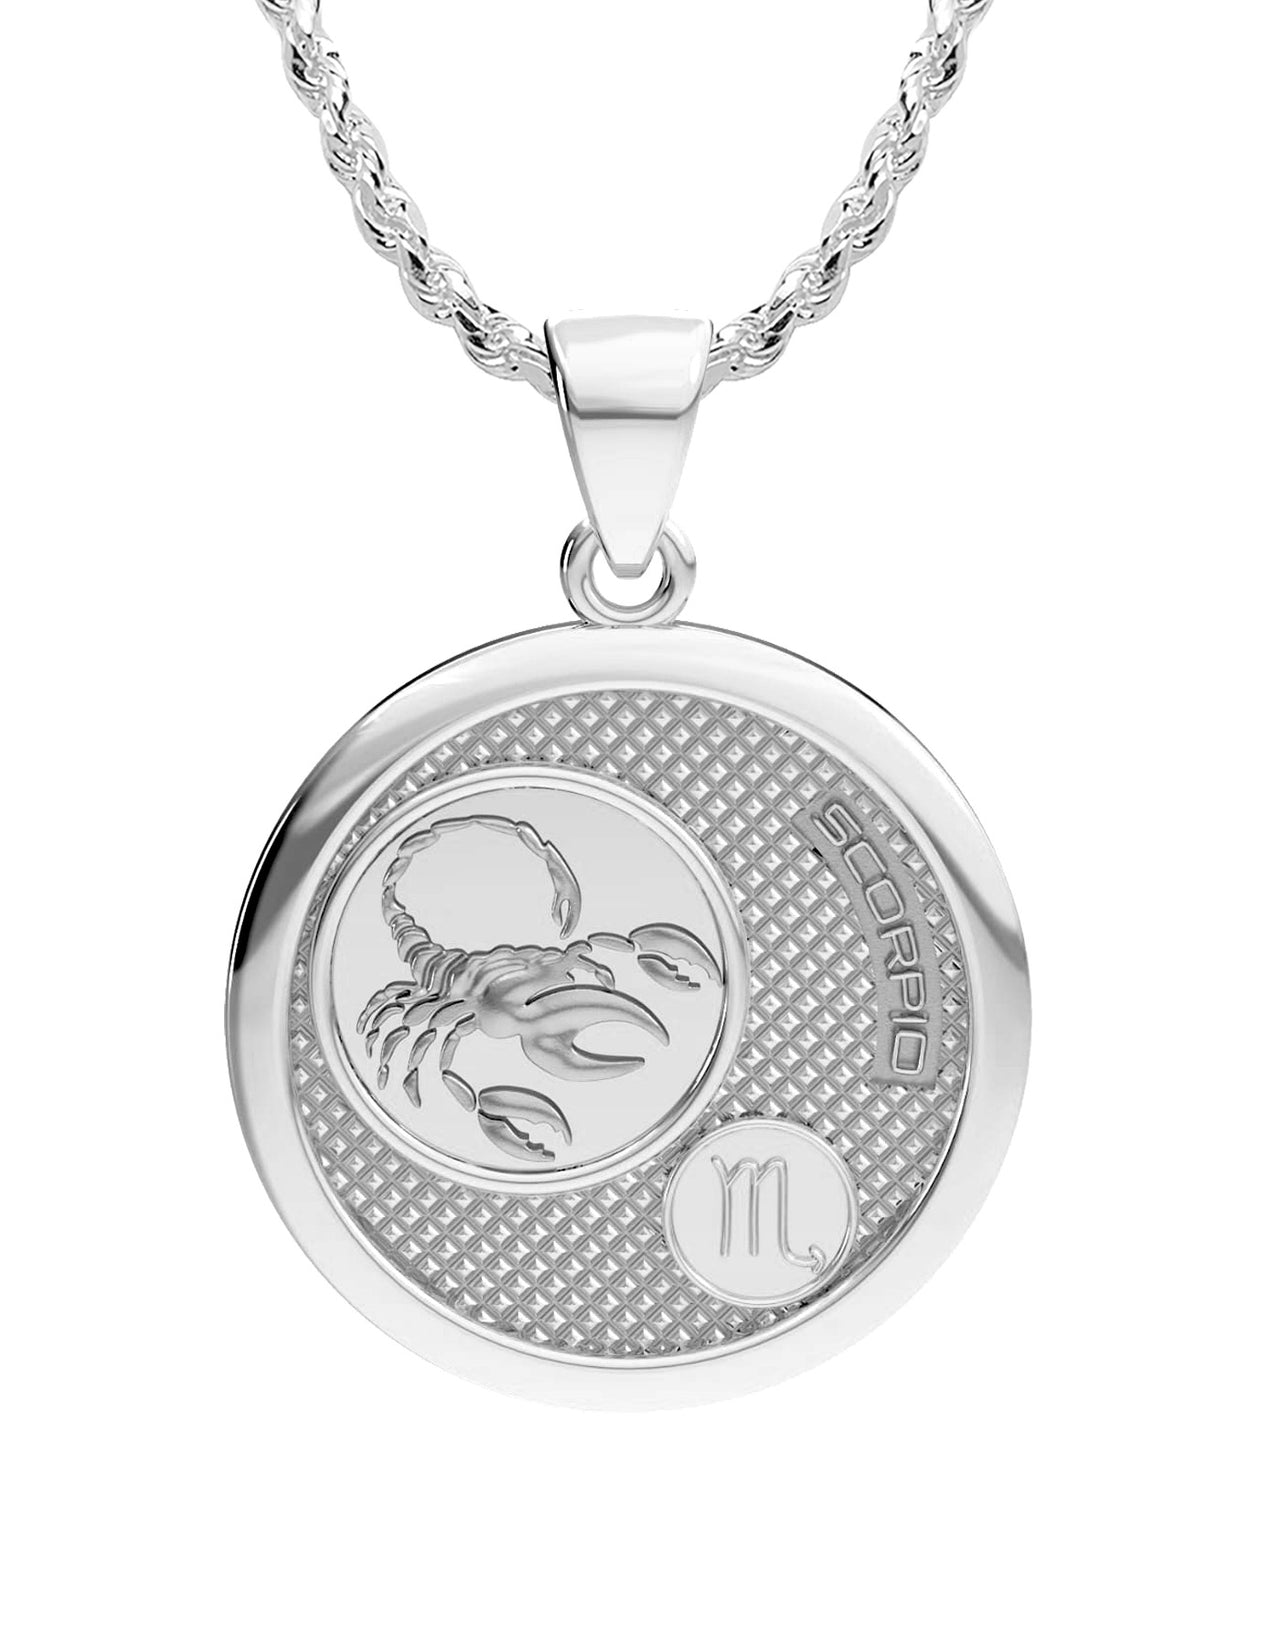 Ladies 925 Sterling Silver Round Scorpio Zodiac Polished Finish Pendant Necklace, 25mm